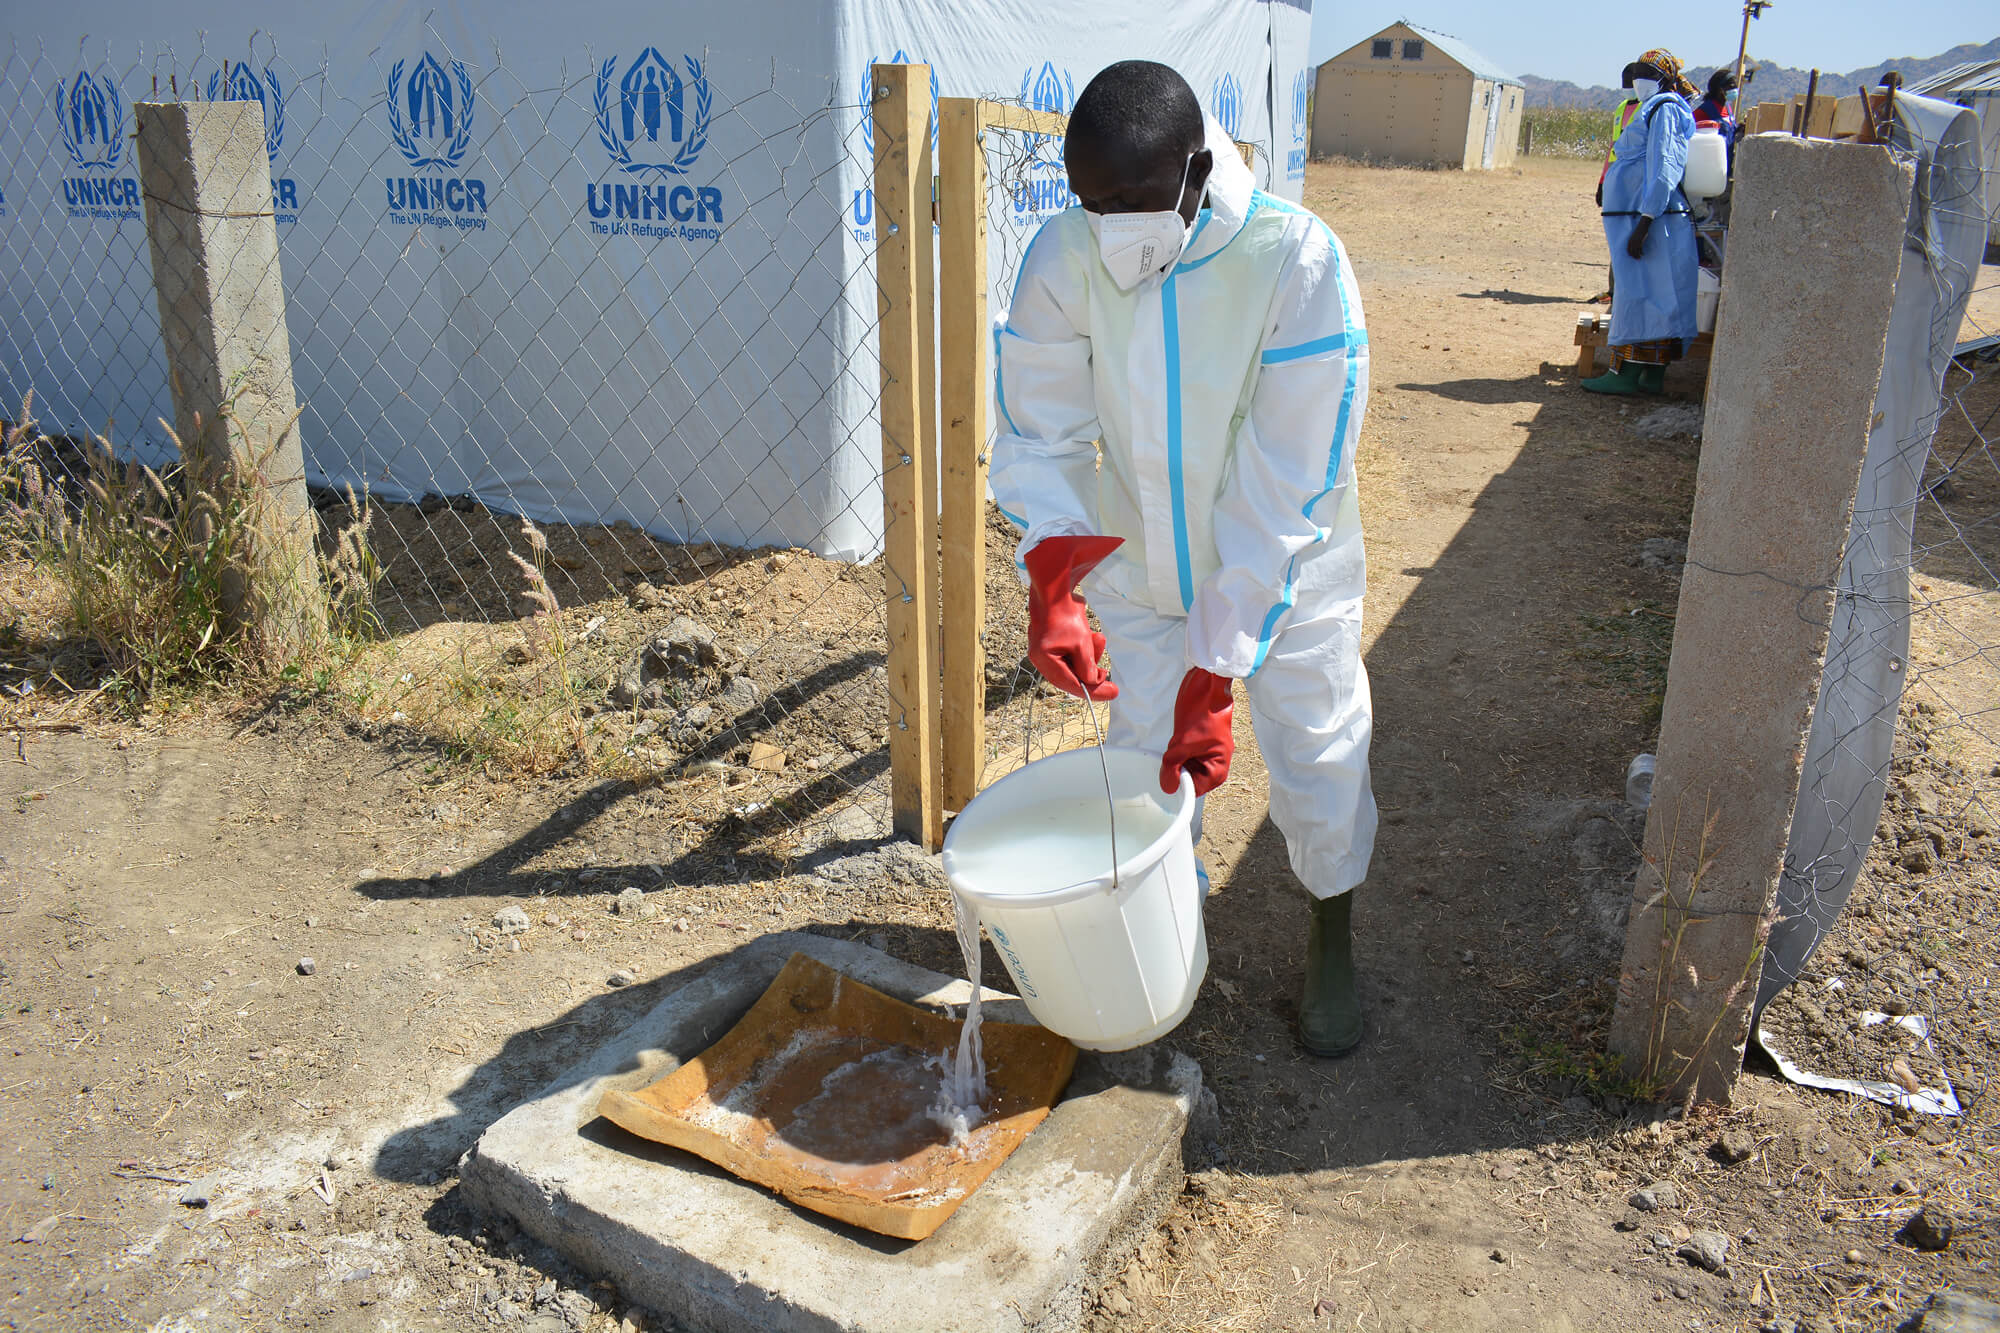 Modu Modu, a community health worker, disinfects a mat in the cholera treatment center with a diluted chlorine solution.